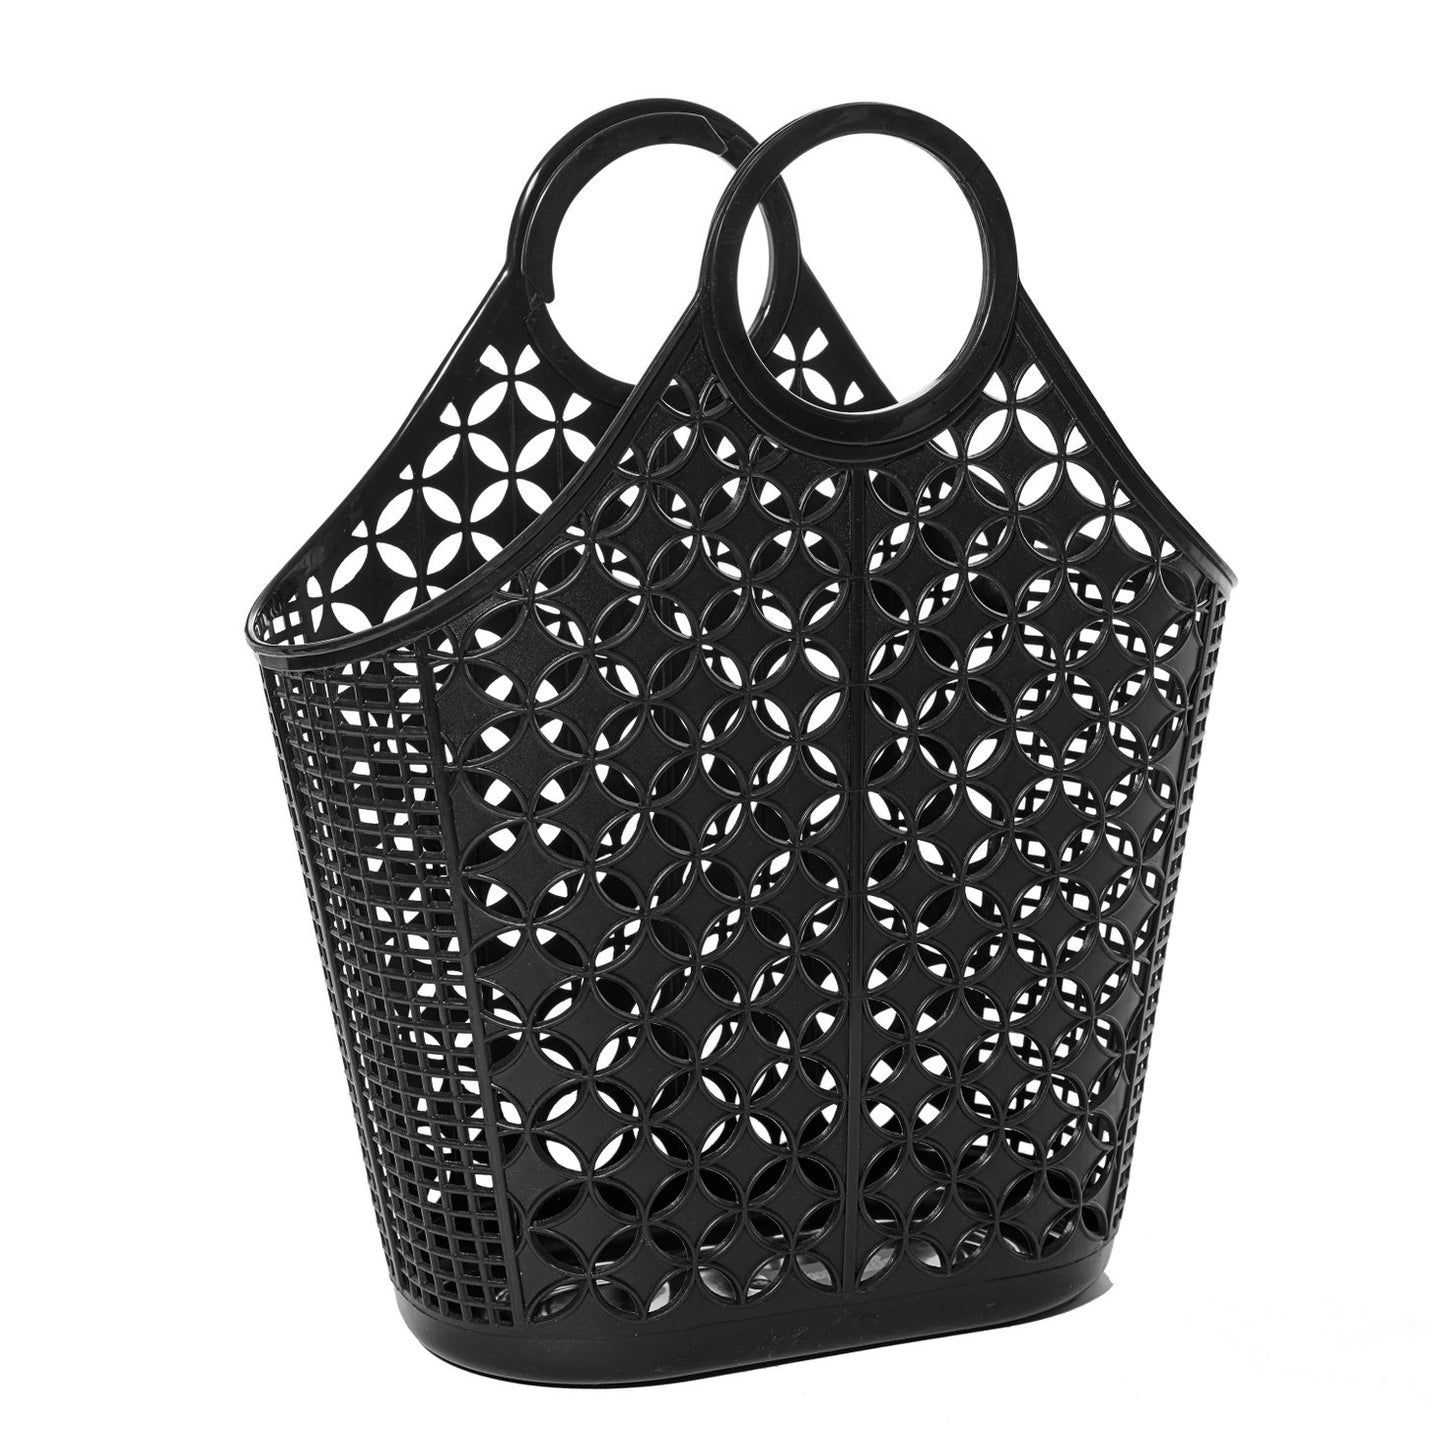 Atomic Tote Jelly Basket